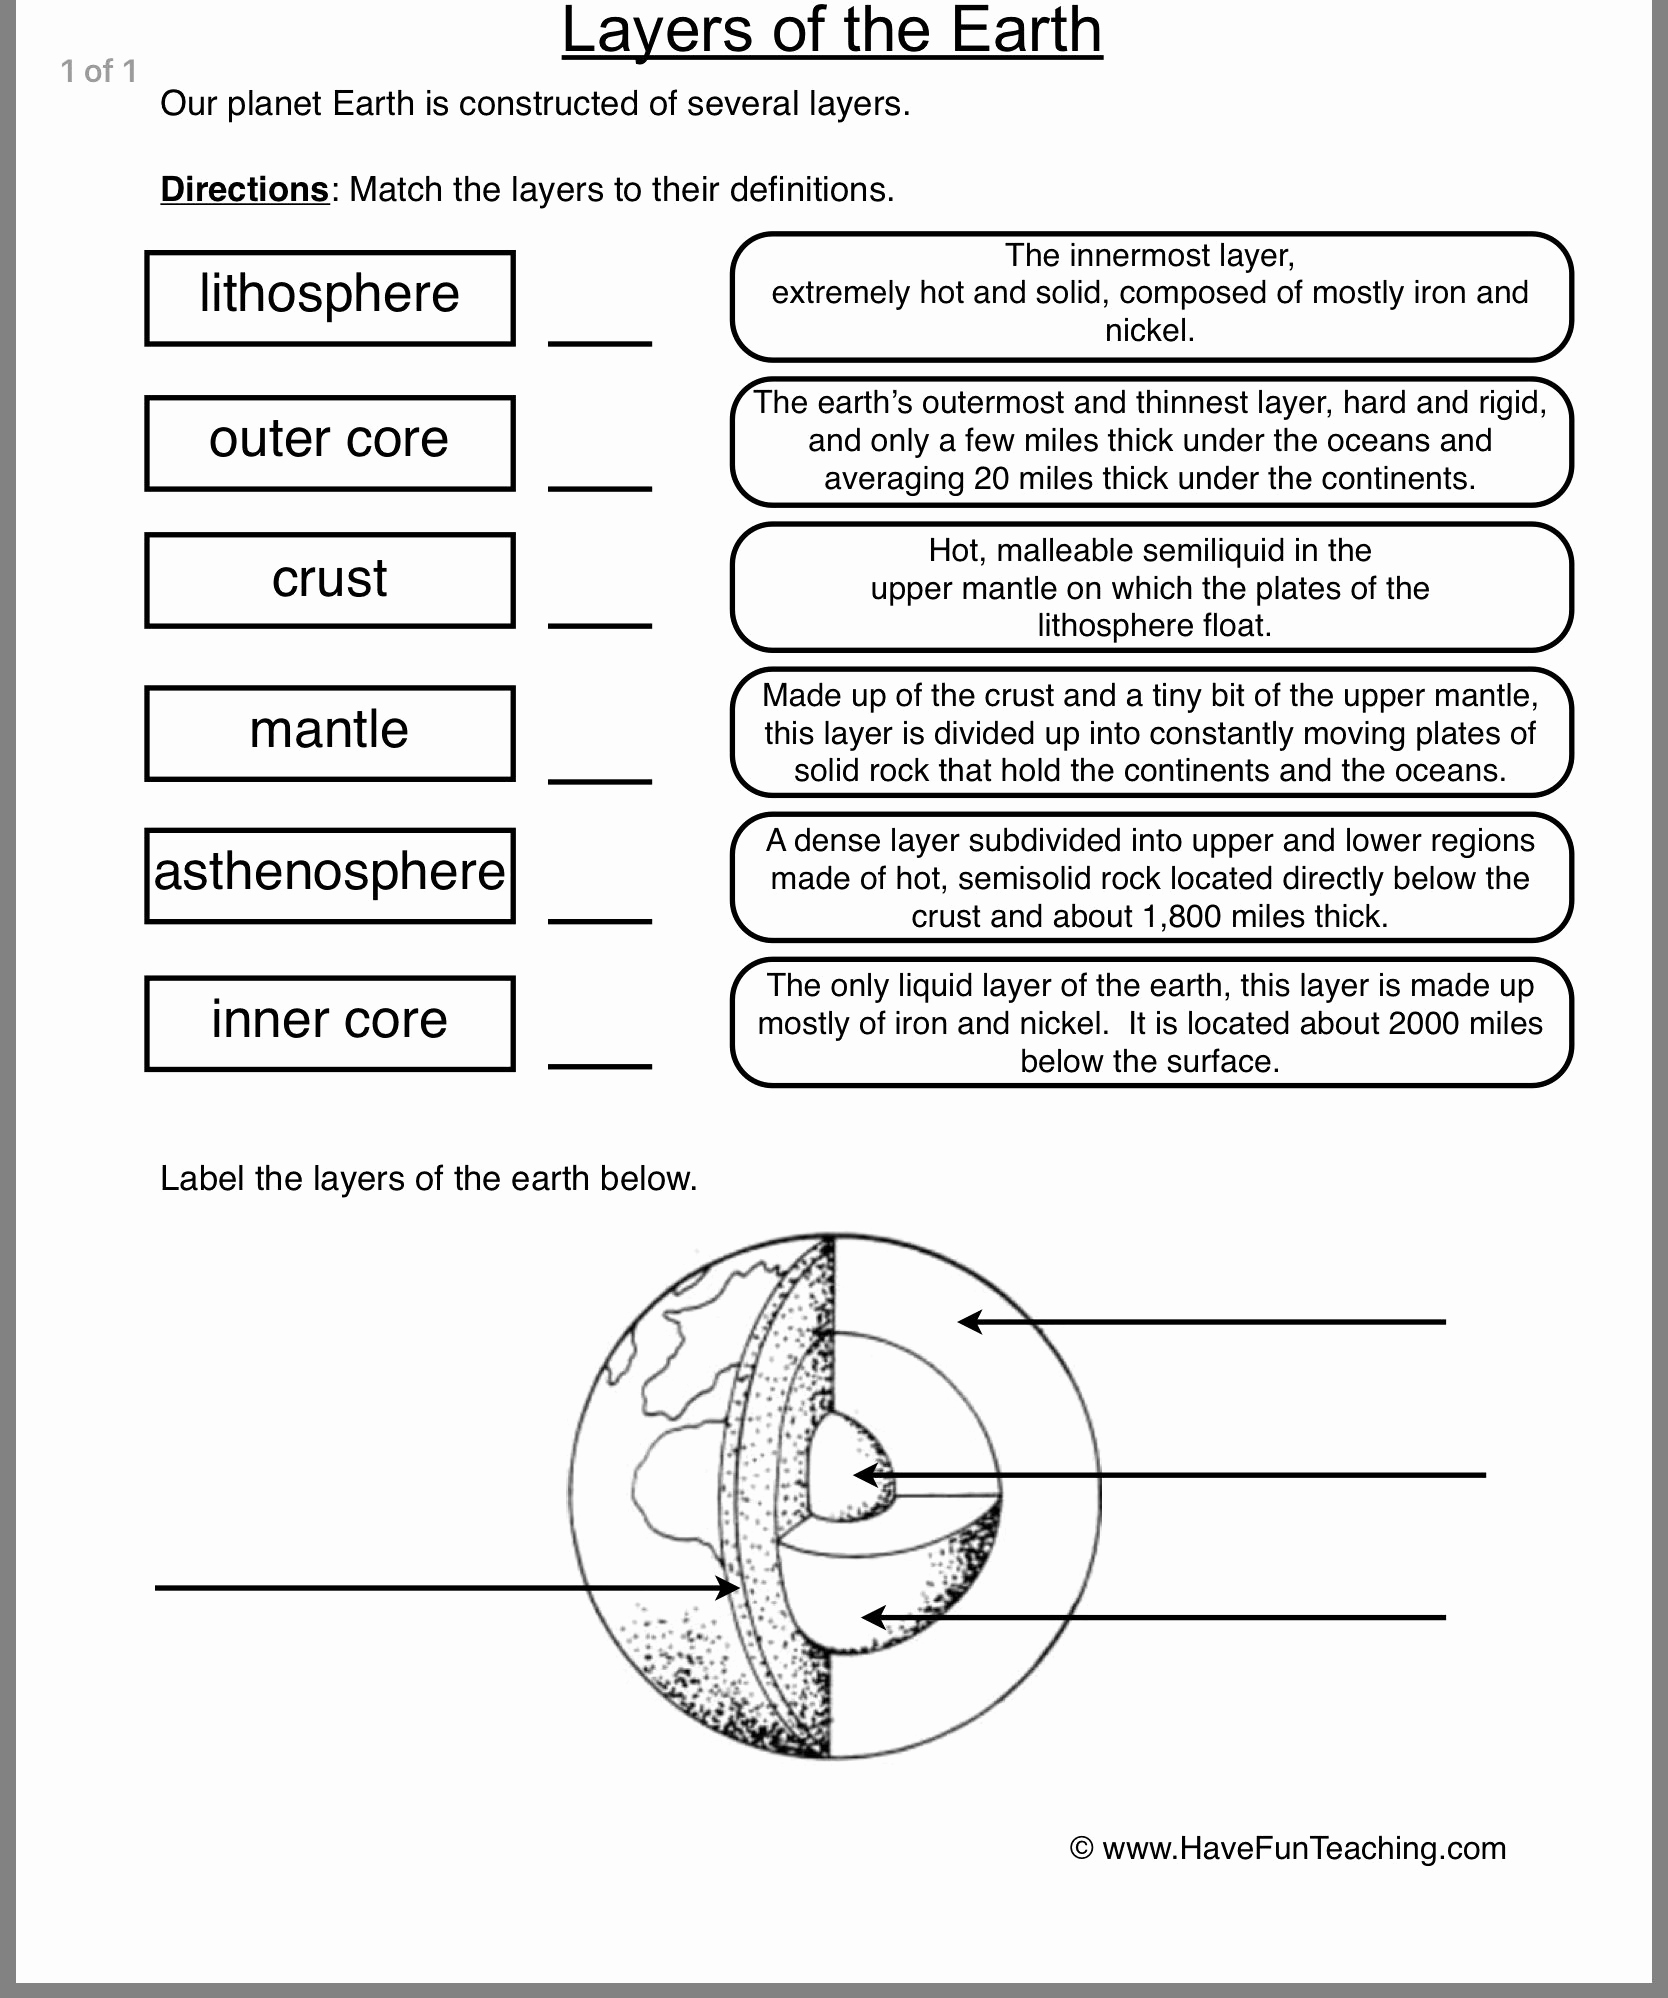 7th Grade Life Science Worksheets Unique Teach Child How to Read 7th Grade Science Worksheets for